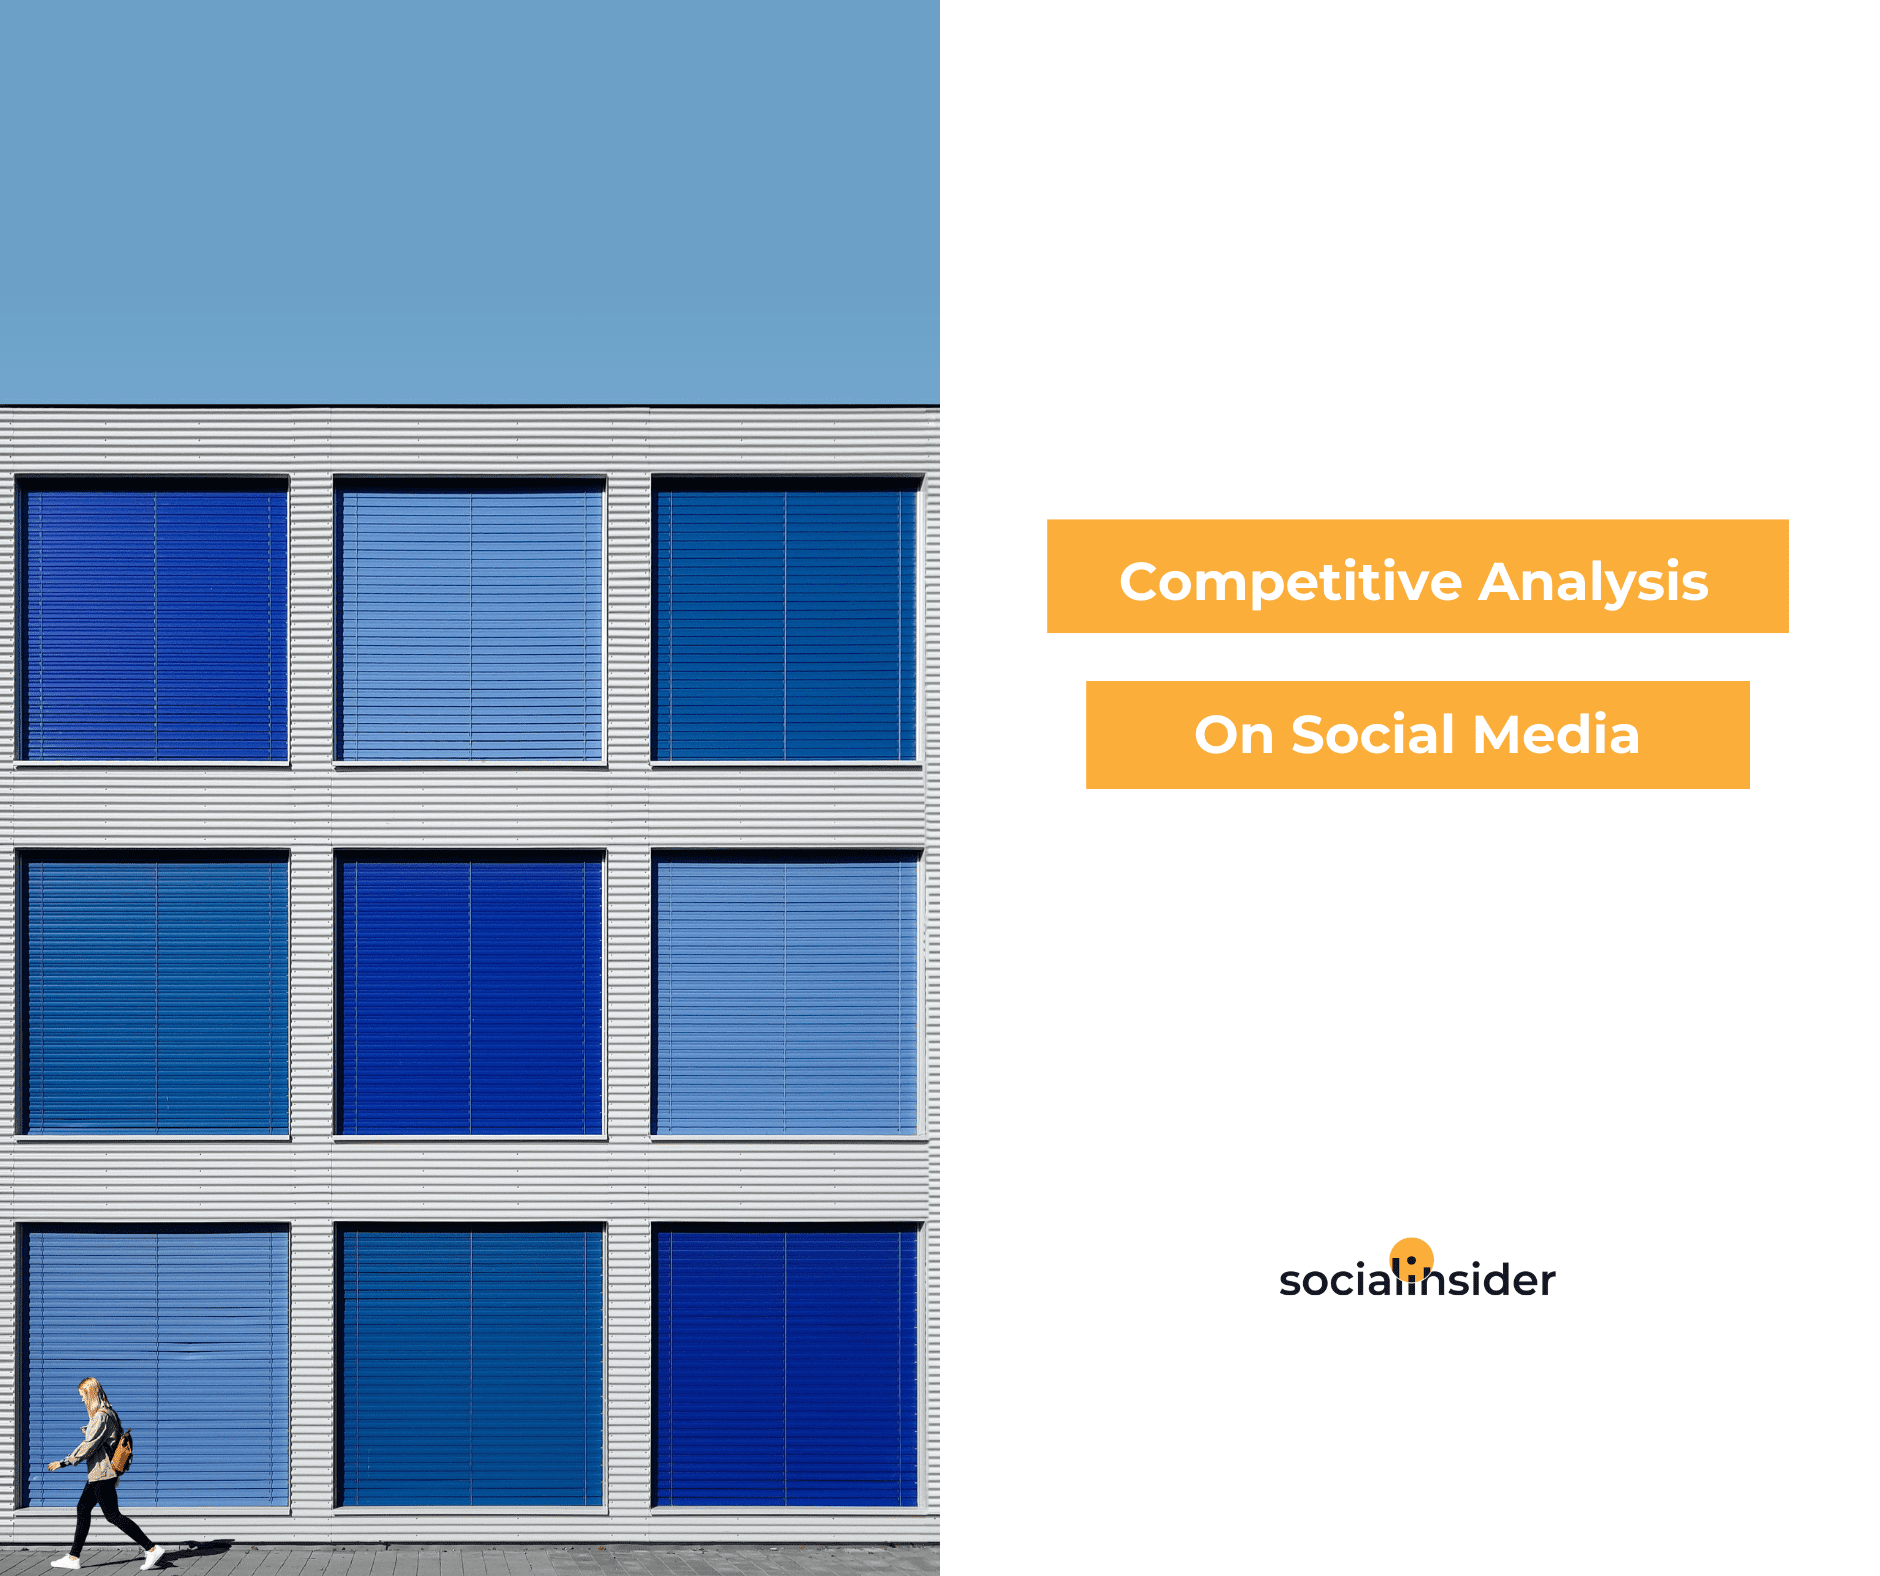 Competitor Analysis Excel Template